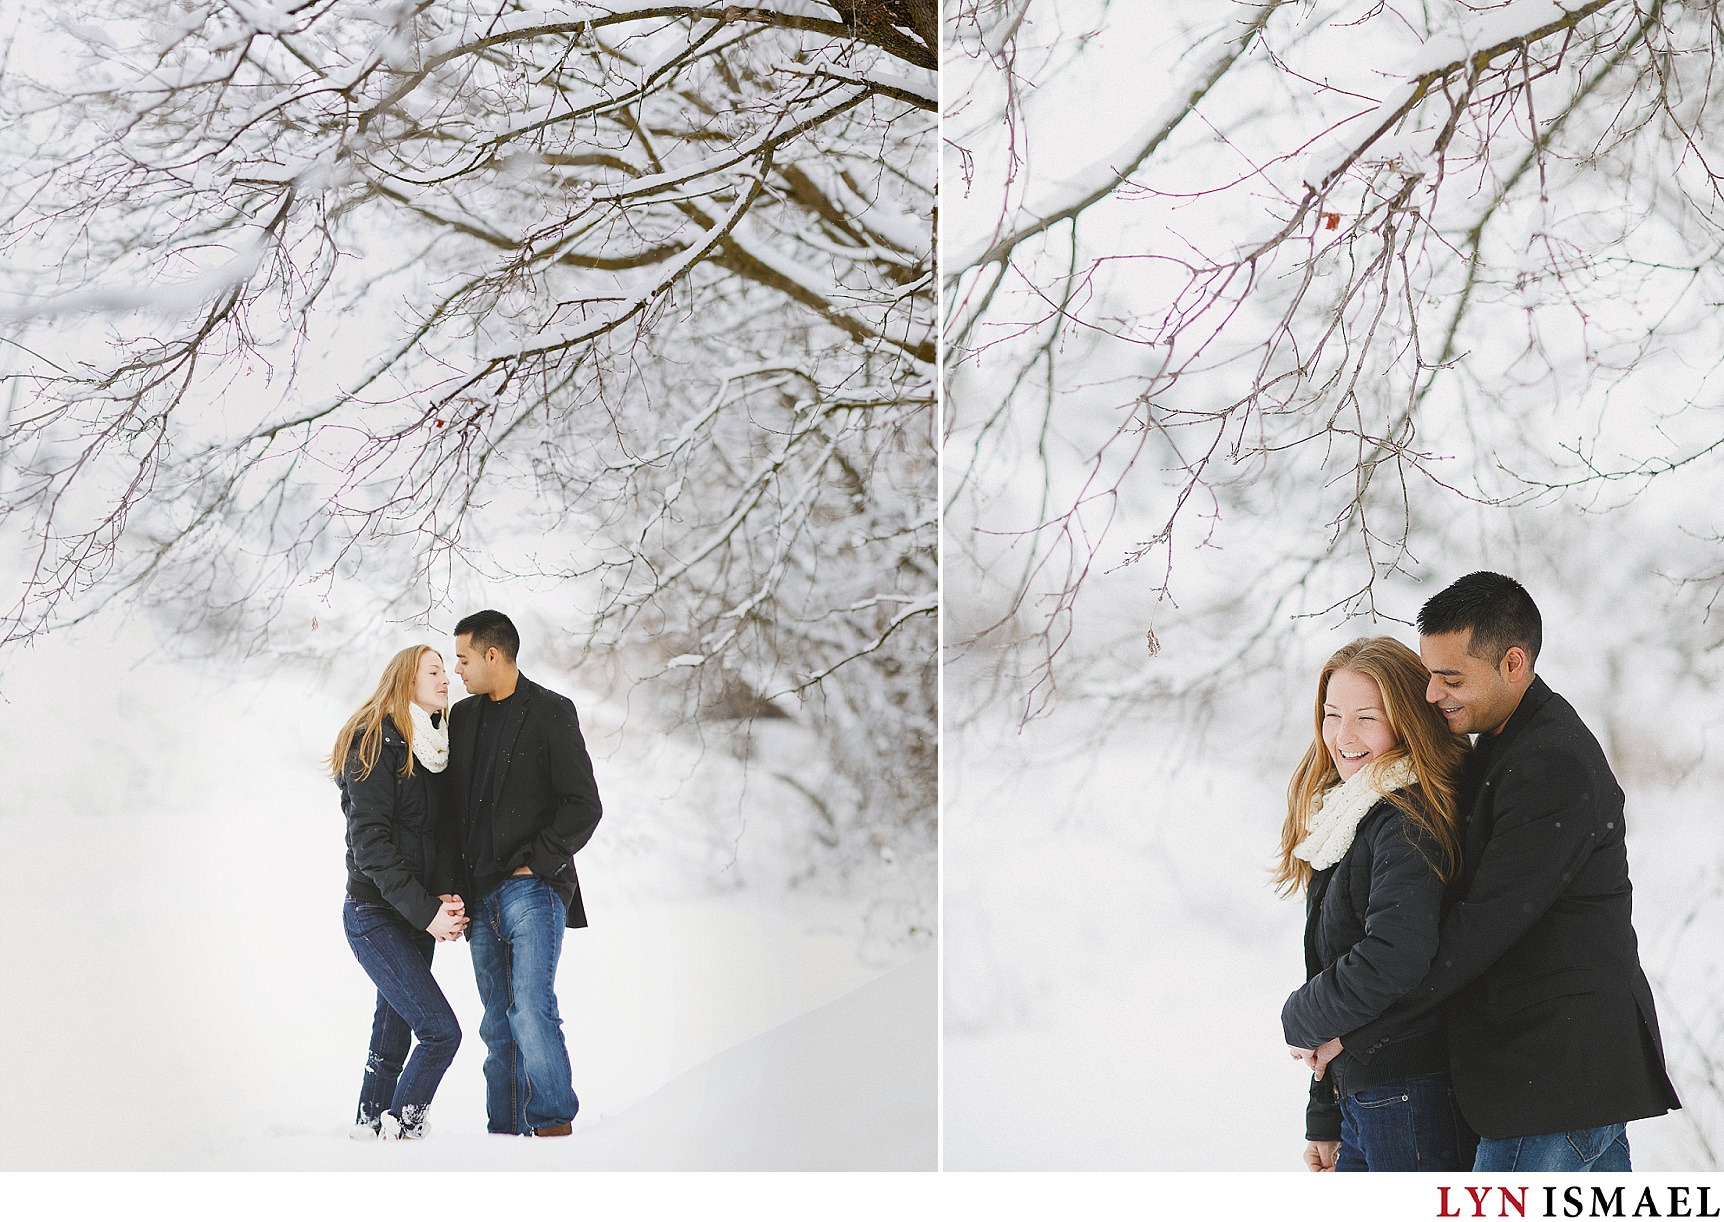 Winter wonderland at an engagement session in Schomberg.